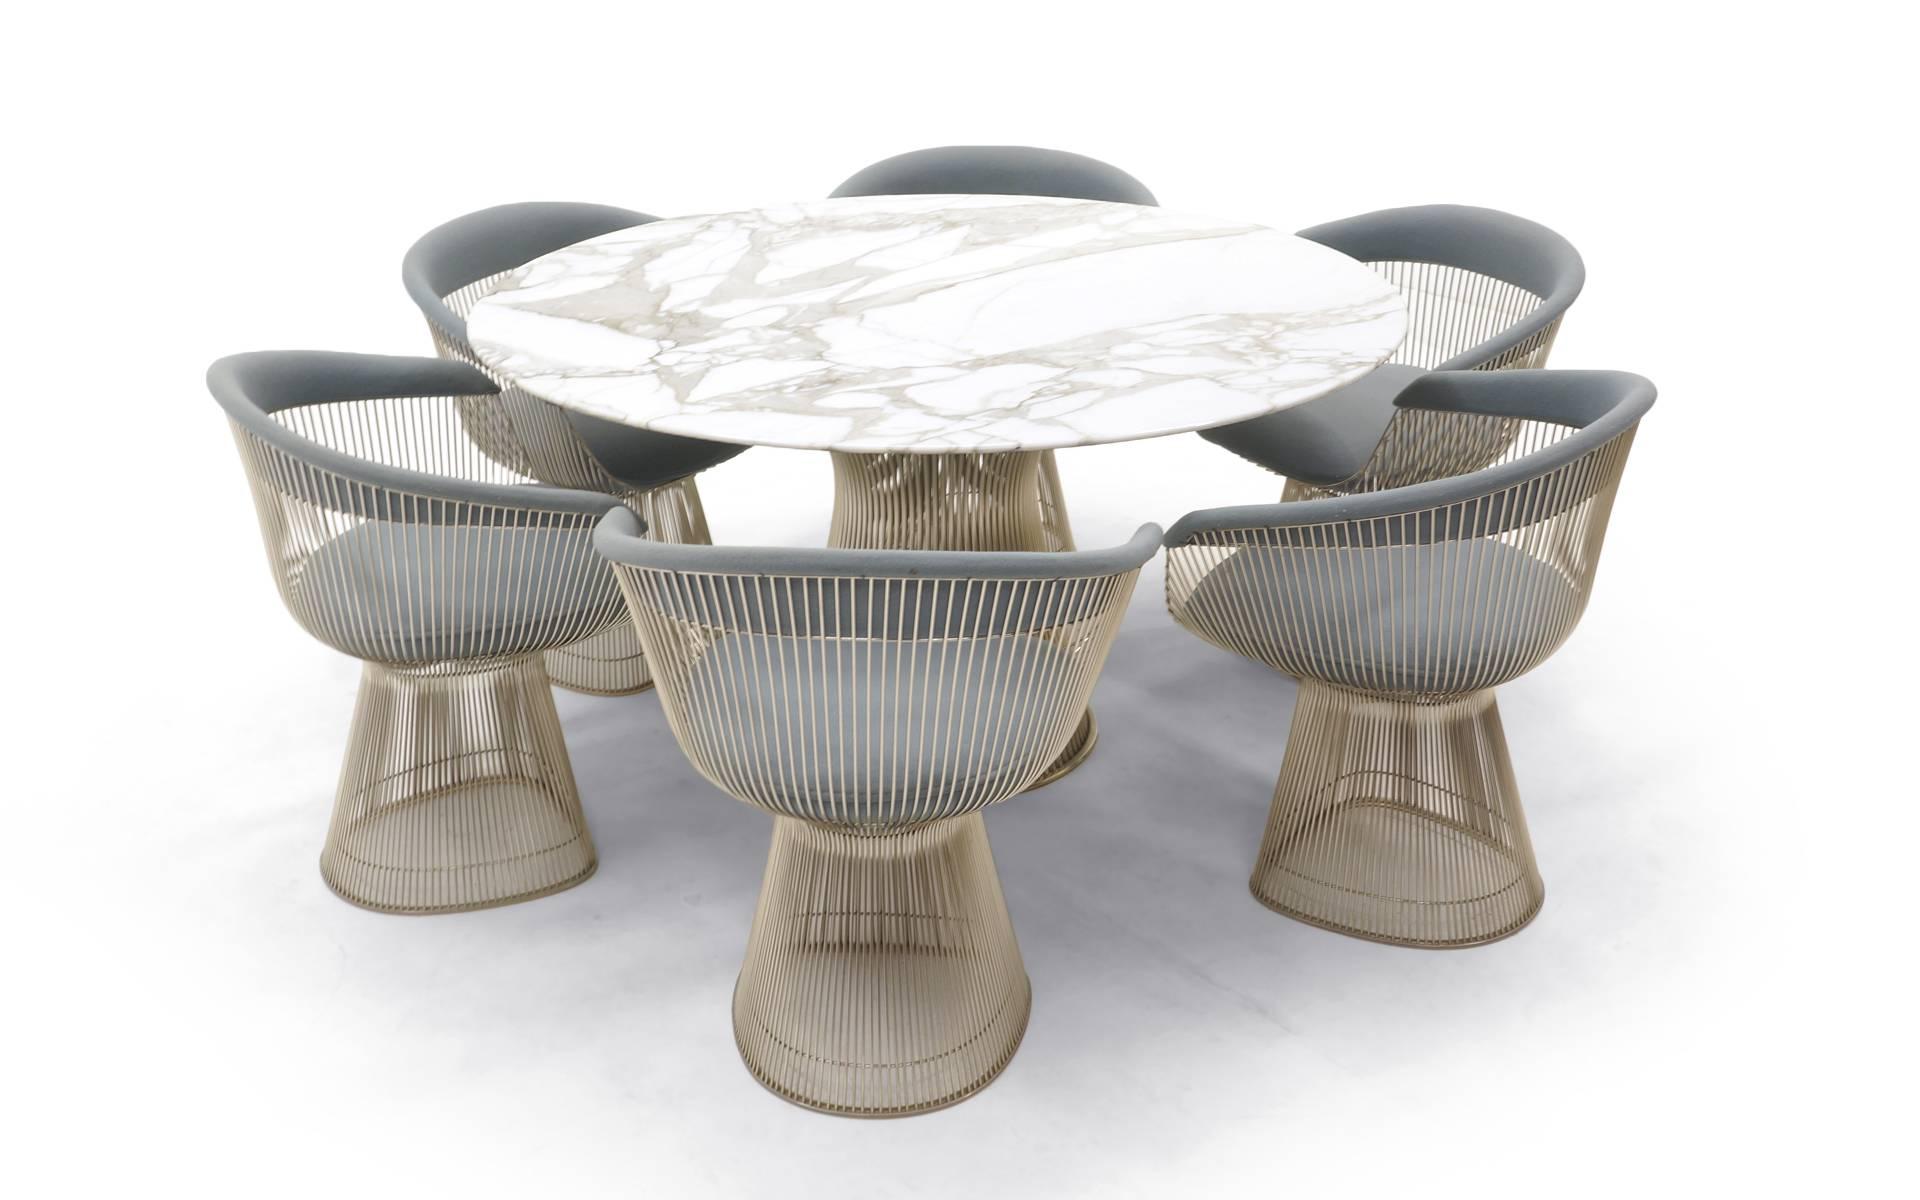 Warren Platner for Knoll marble top dining table and six matching chairs. Early Knoll production. The set is in very good condition. No chips to the marble, no rust / wear to the wire structures. The original fabric shows light wear. A beautiful